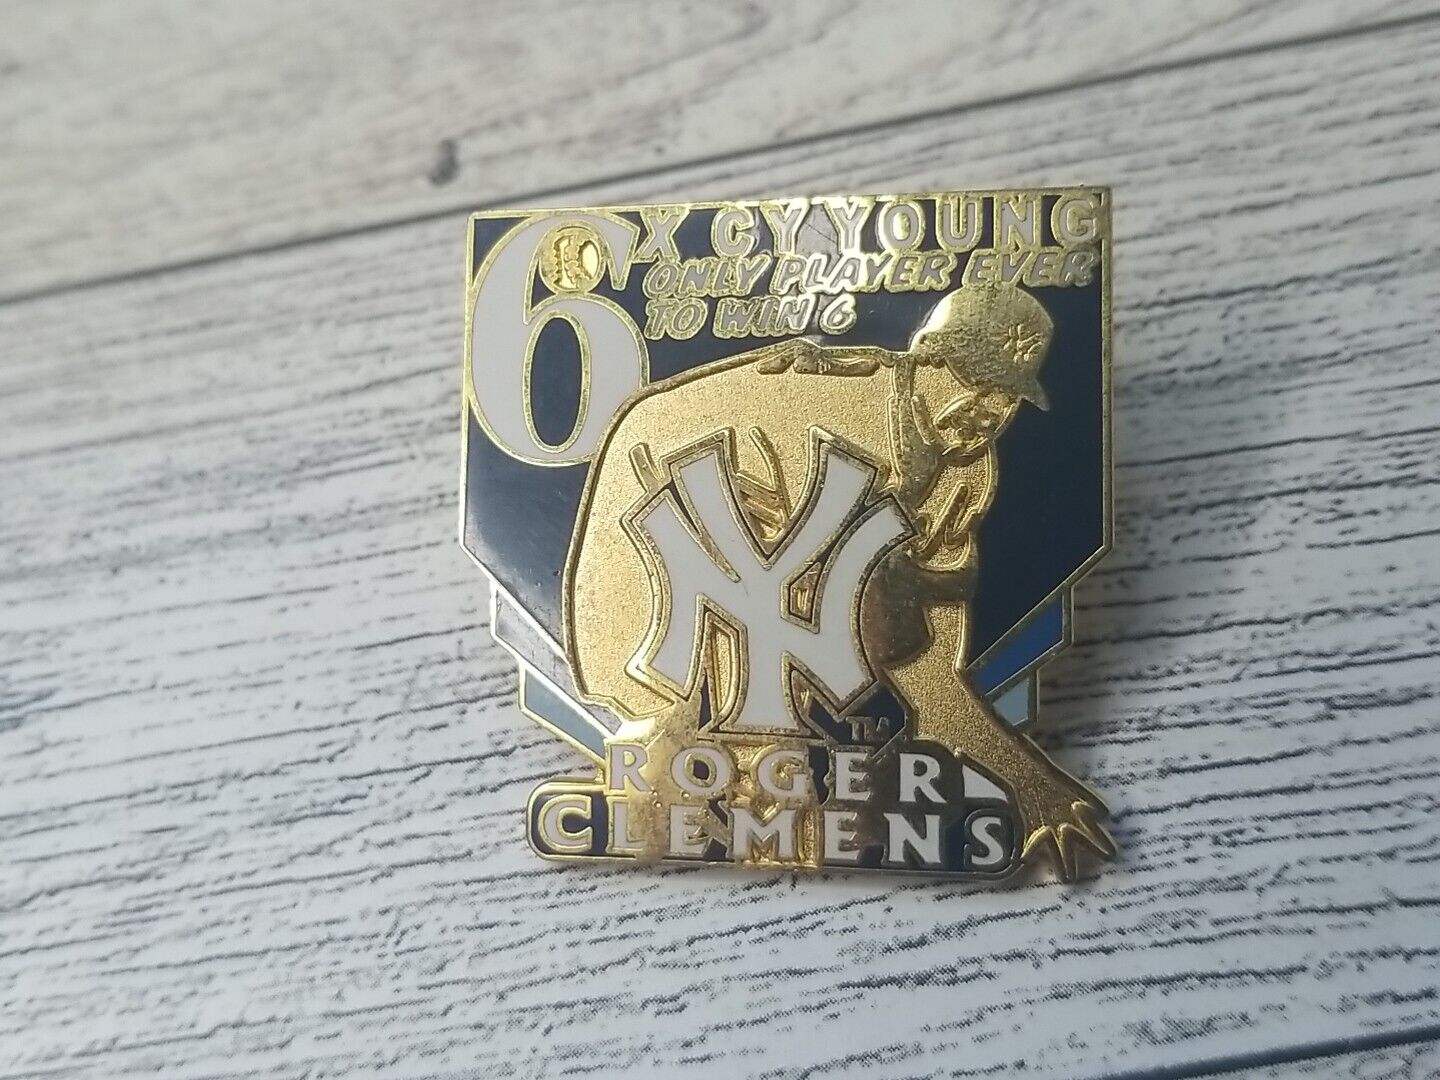 New York Yankees Roger Clemens 6x Cy Young Winner Collectible Lapel Hat Pin MLB